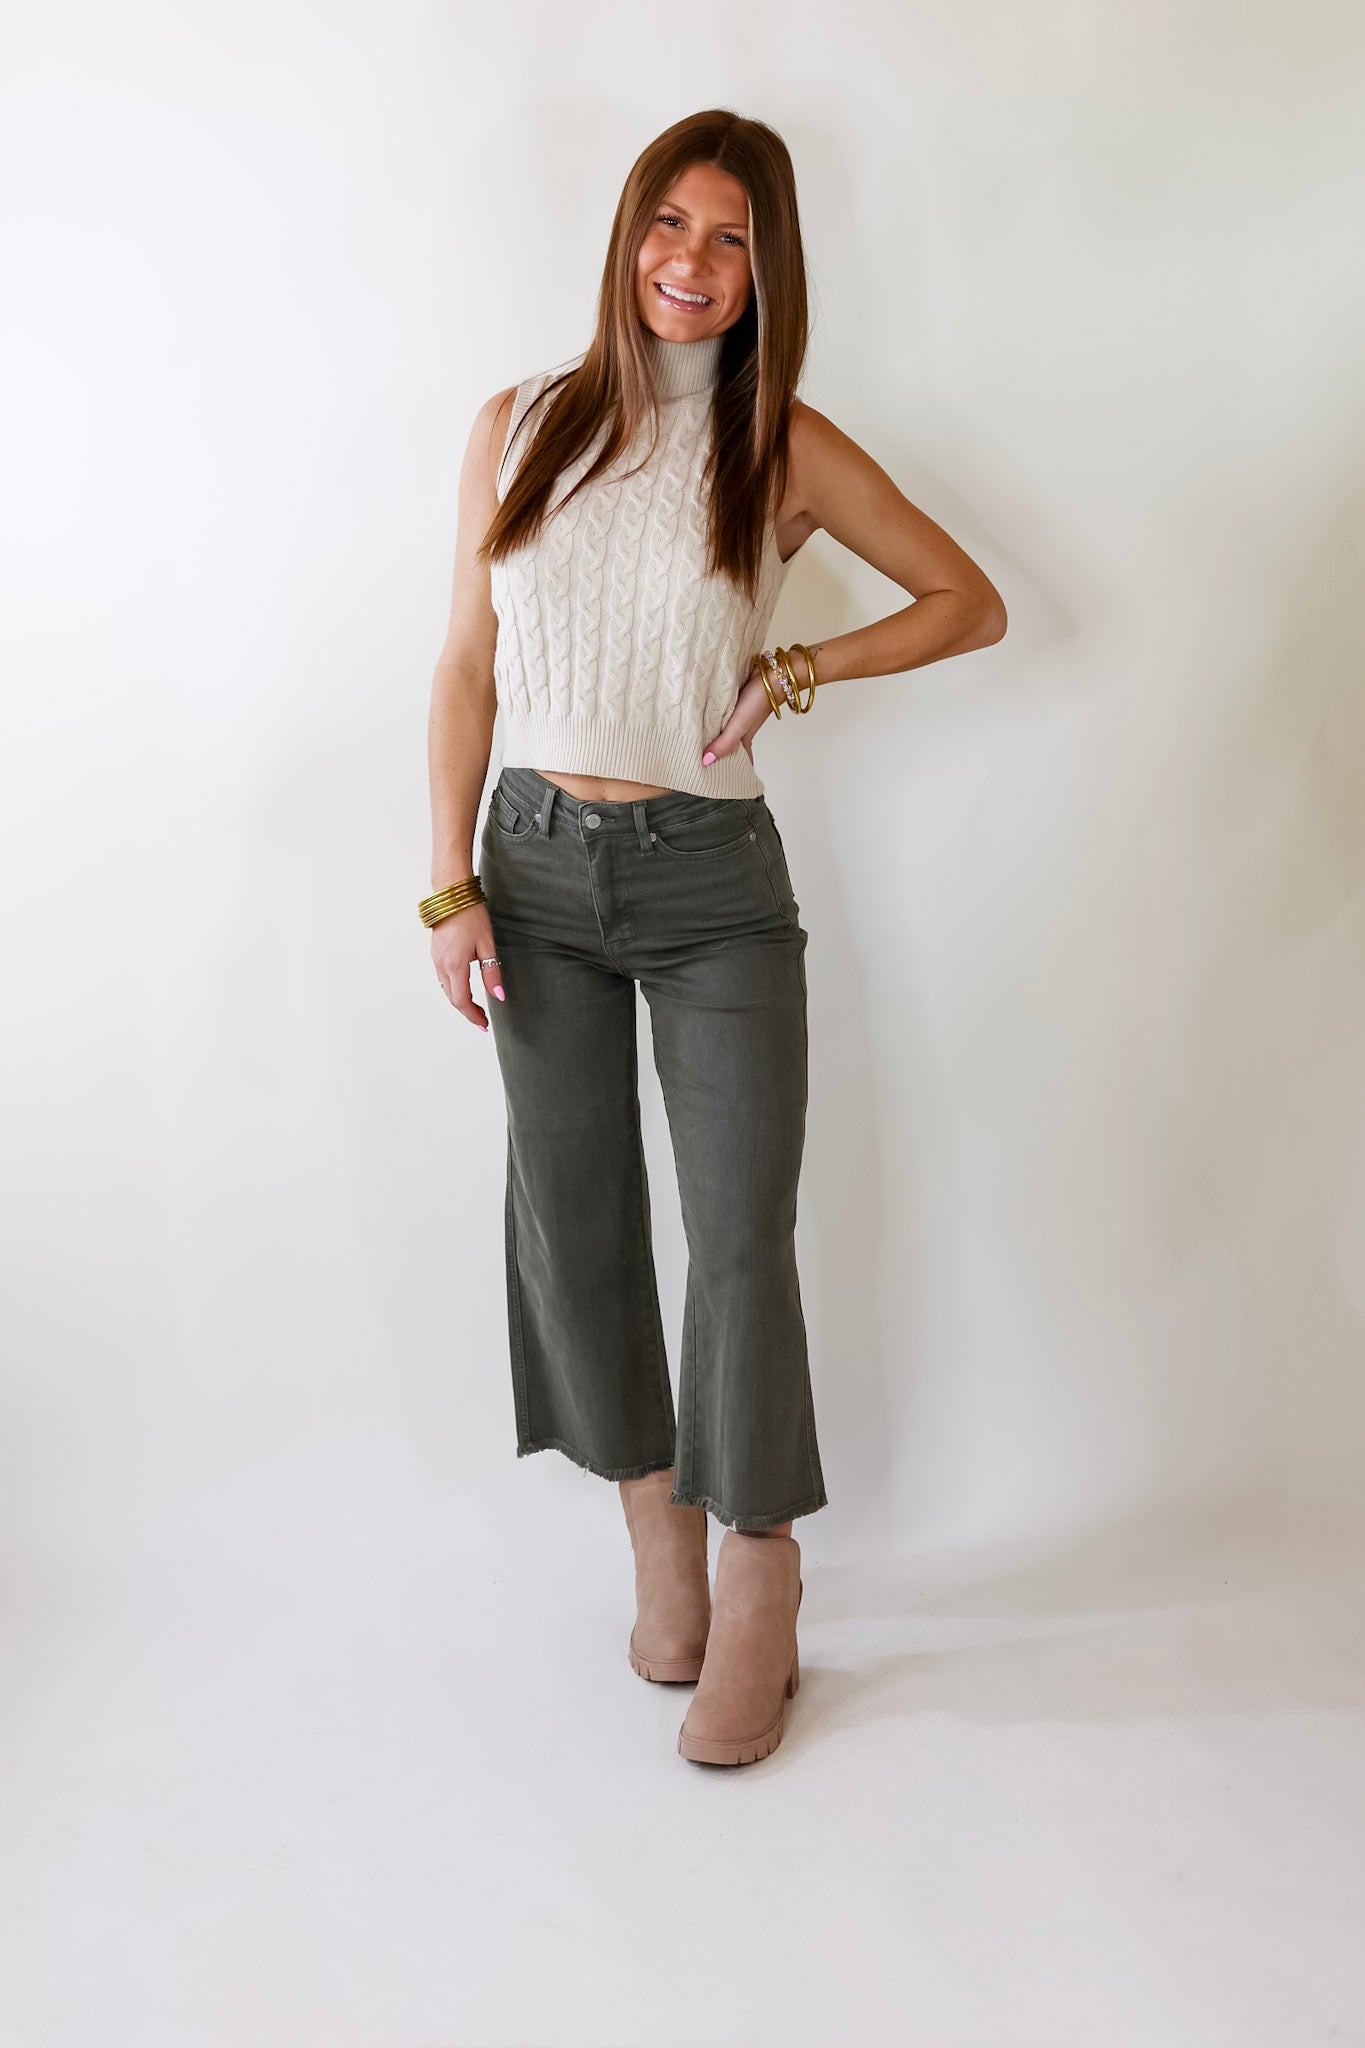 Cider Sips Cropped Sweater Tank Top with High Neck in Ivory - Giddy Up Glamour Boutique